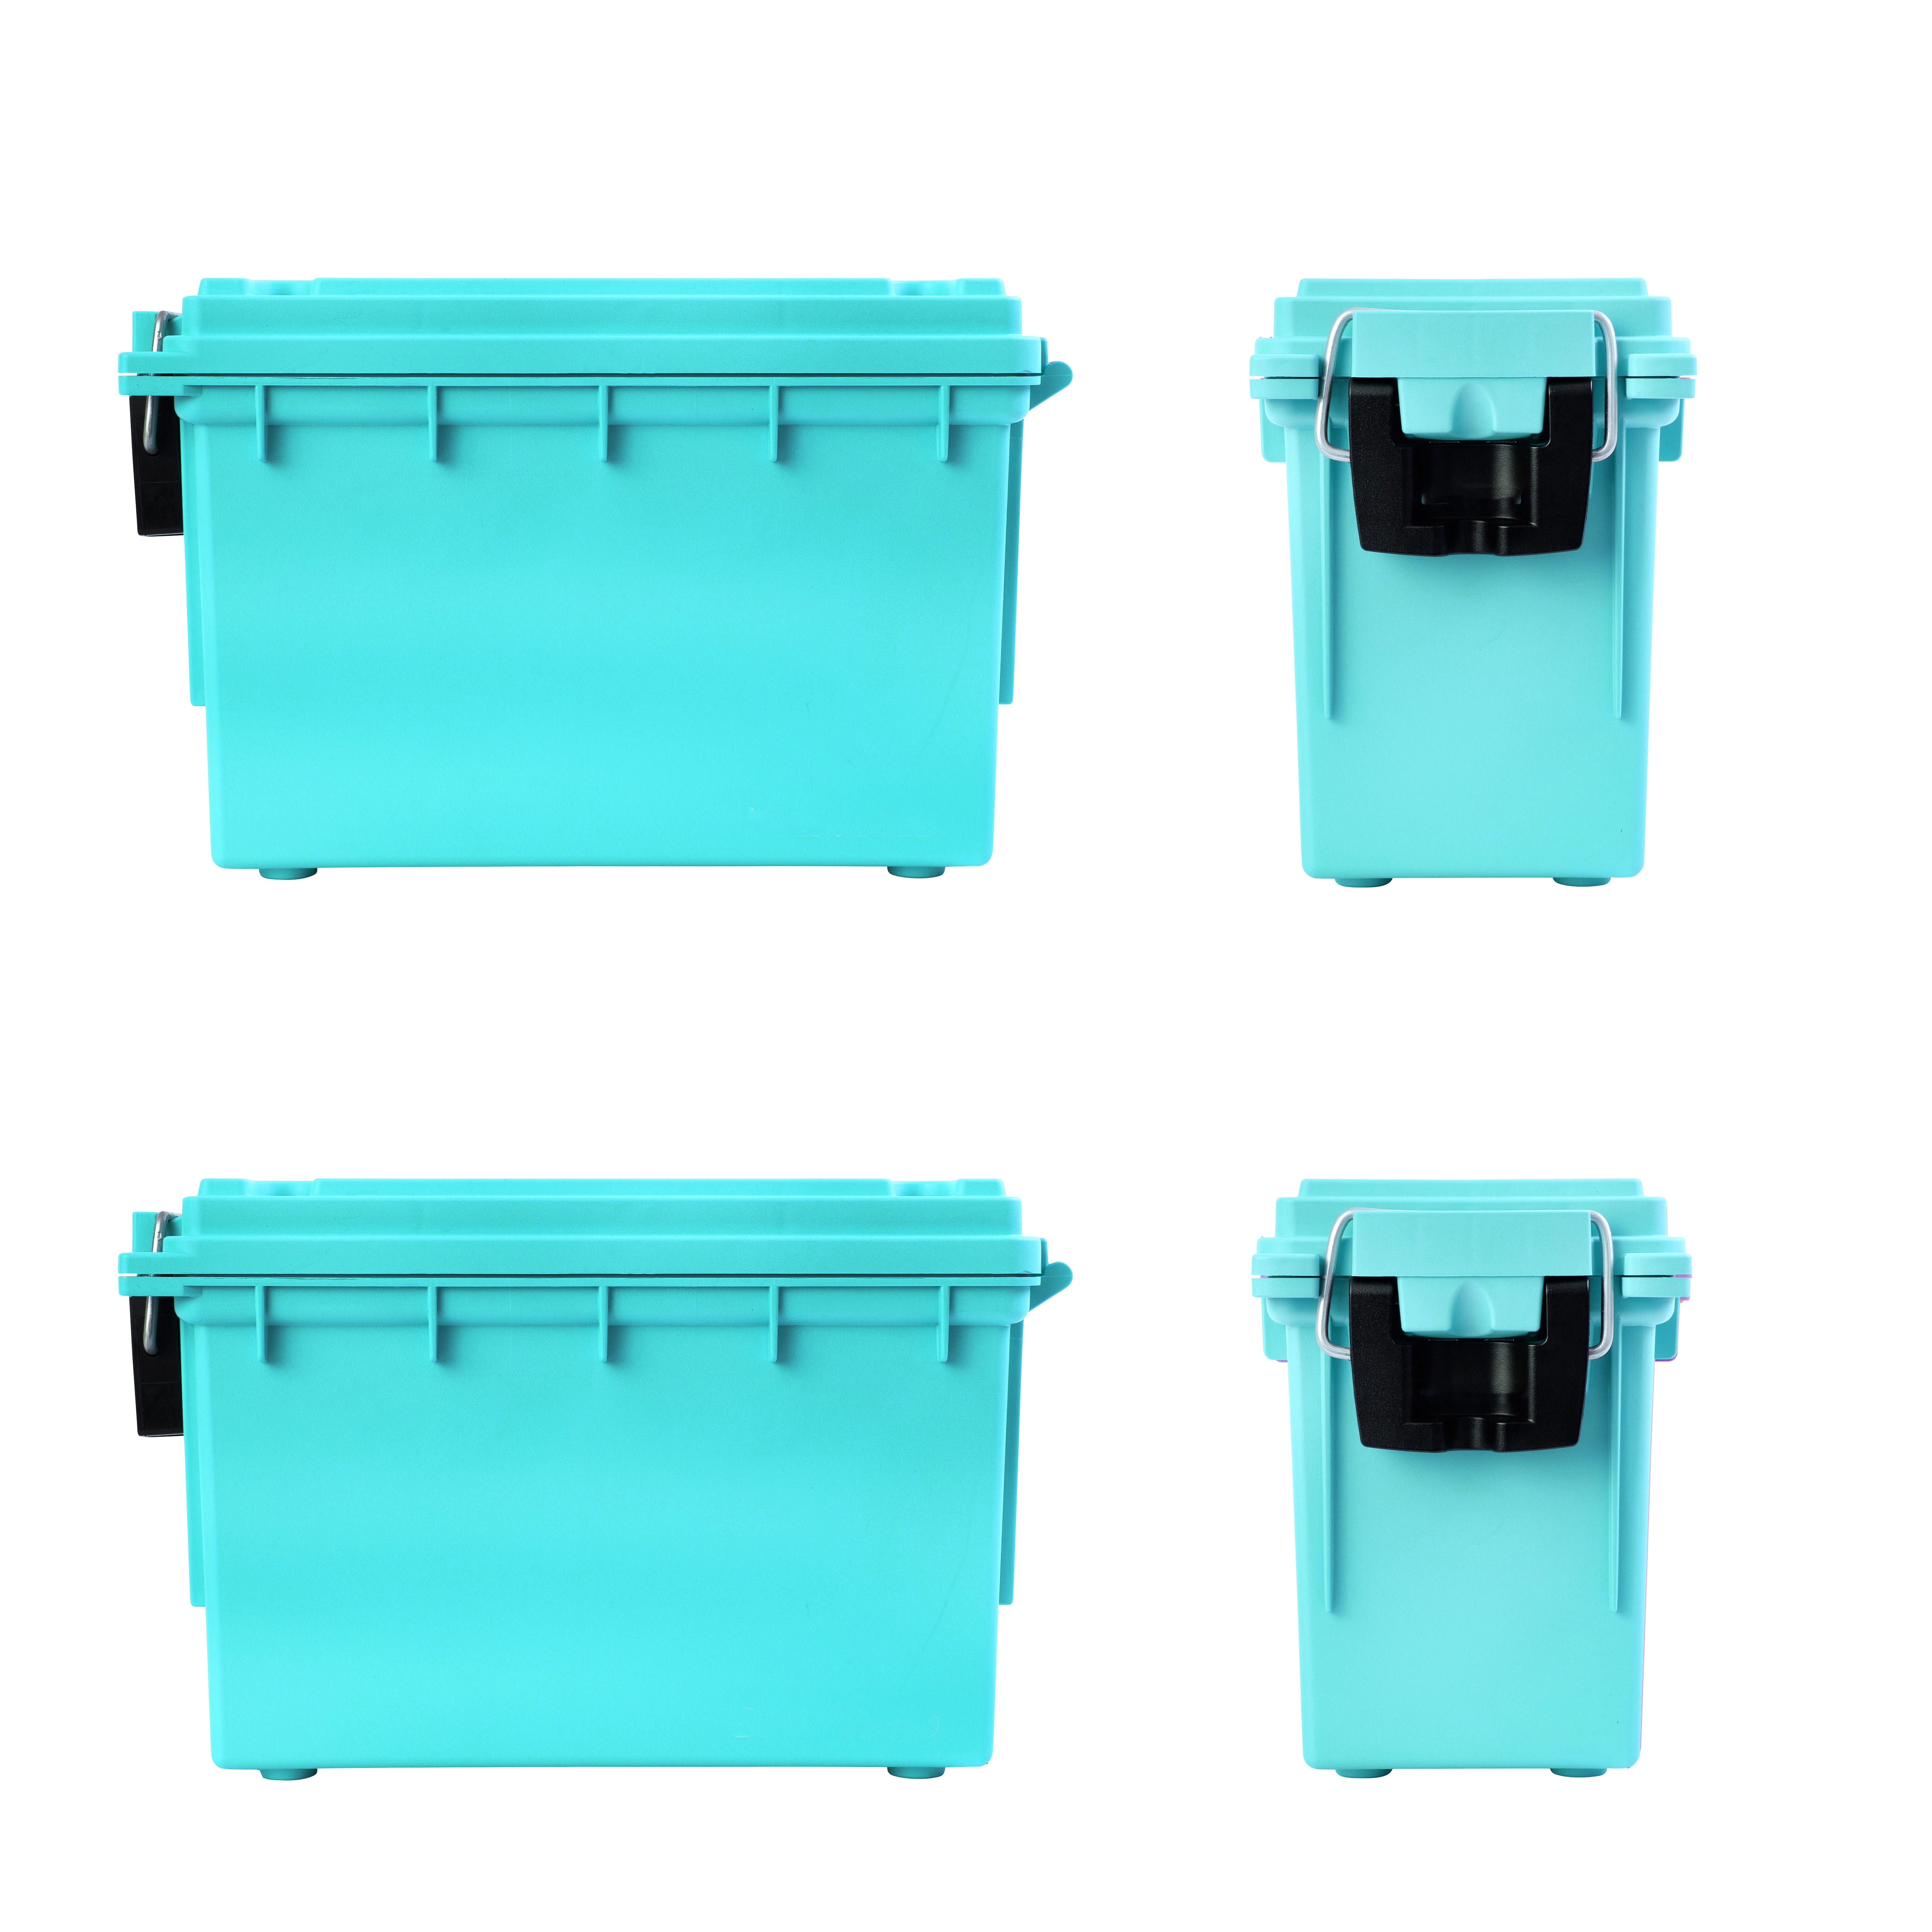 LOGIX 12533 Stackable Handle, Locking Art Supply, Plastic Storage  Containers with Lids, Craft Organizer Box, Made in The U.S.A, Teal - Coupon  Codes, Promo Codes, Daily Deals, Save Money Today